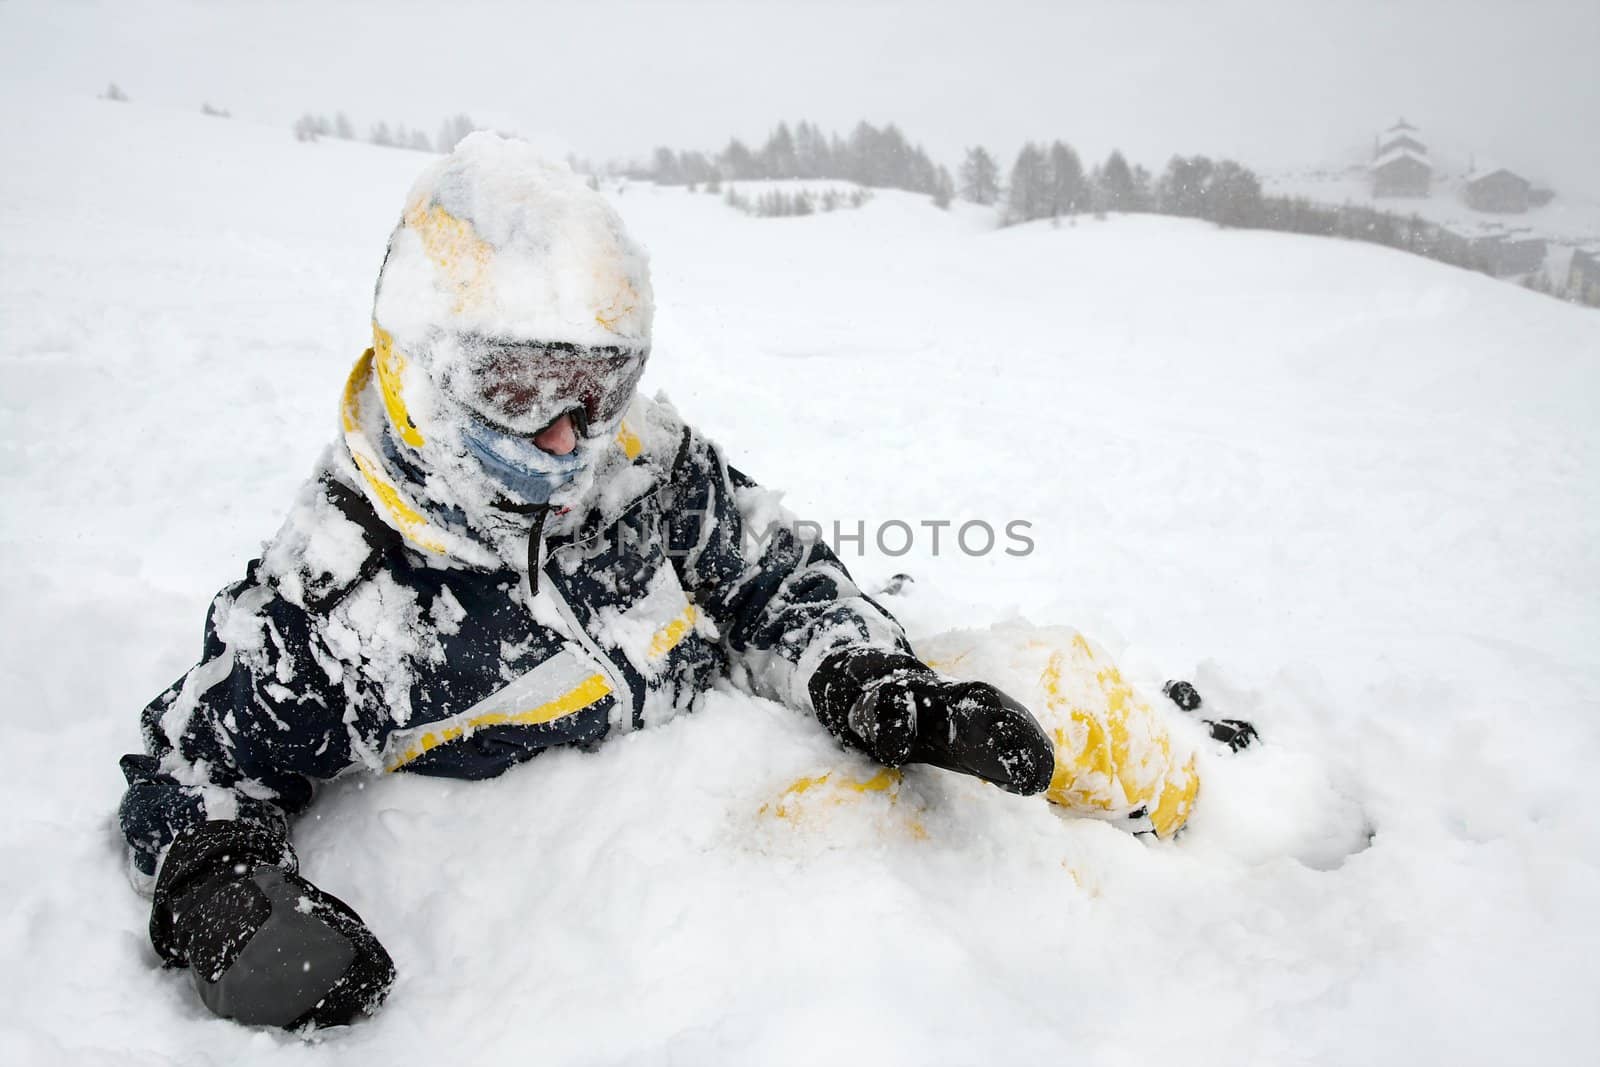 Skier in the snow after falling over